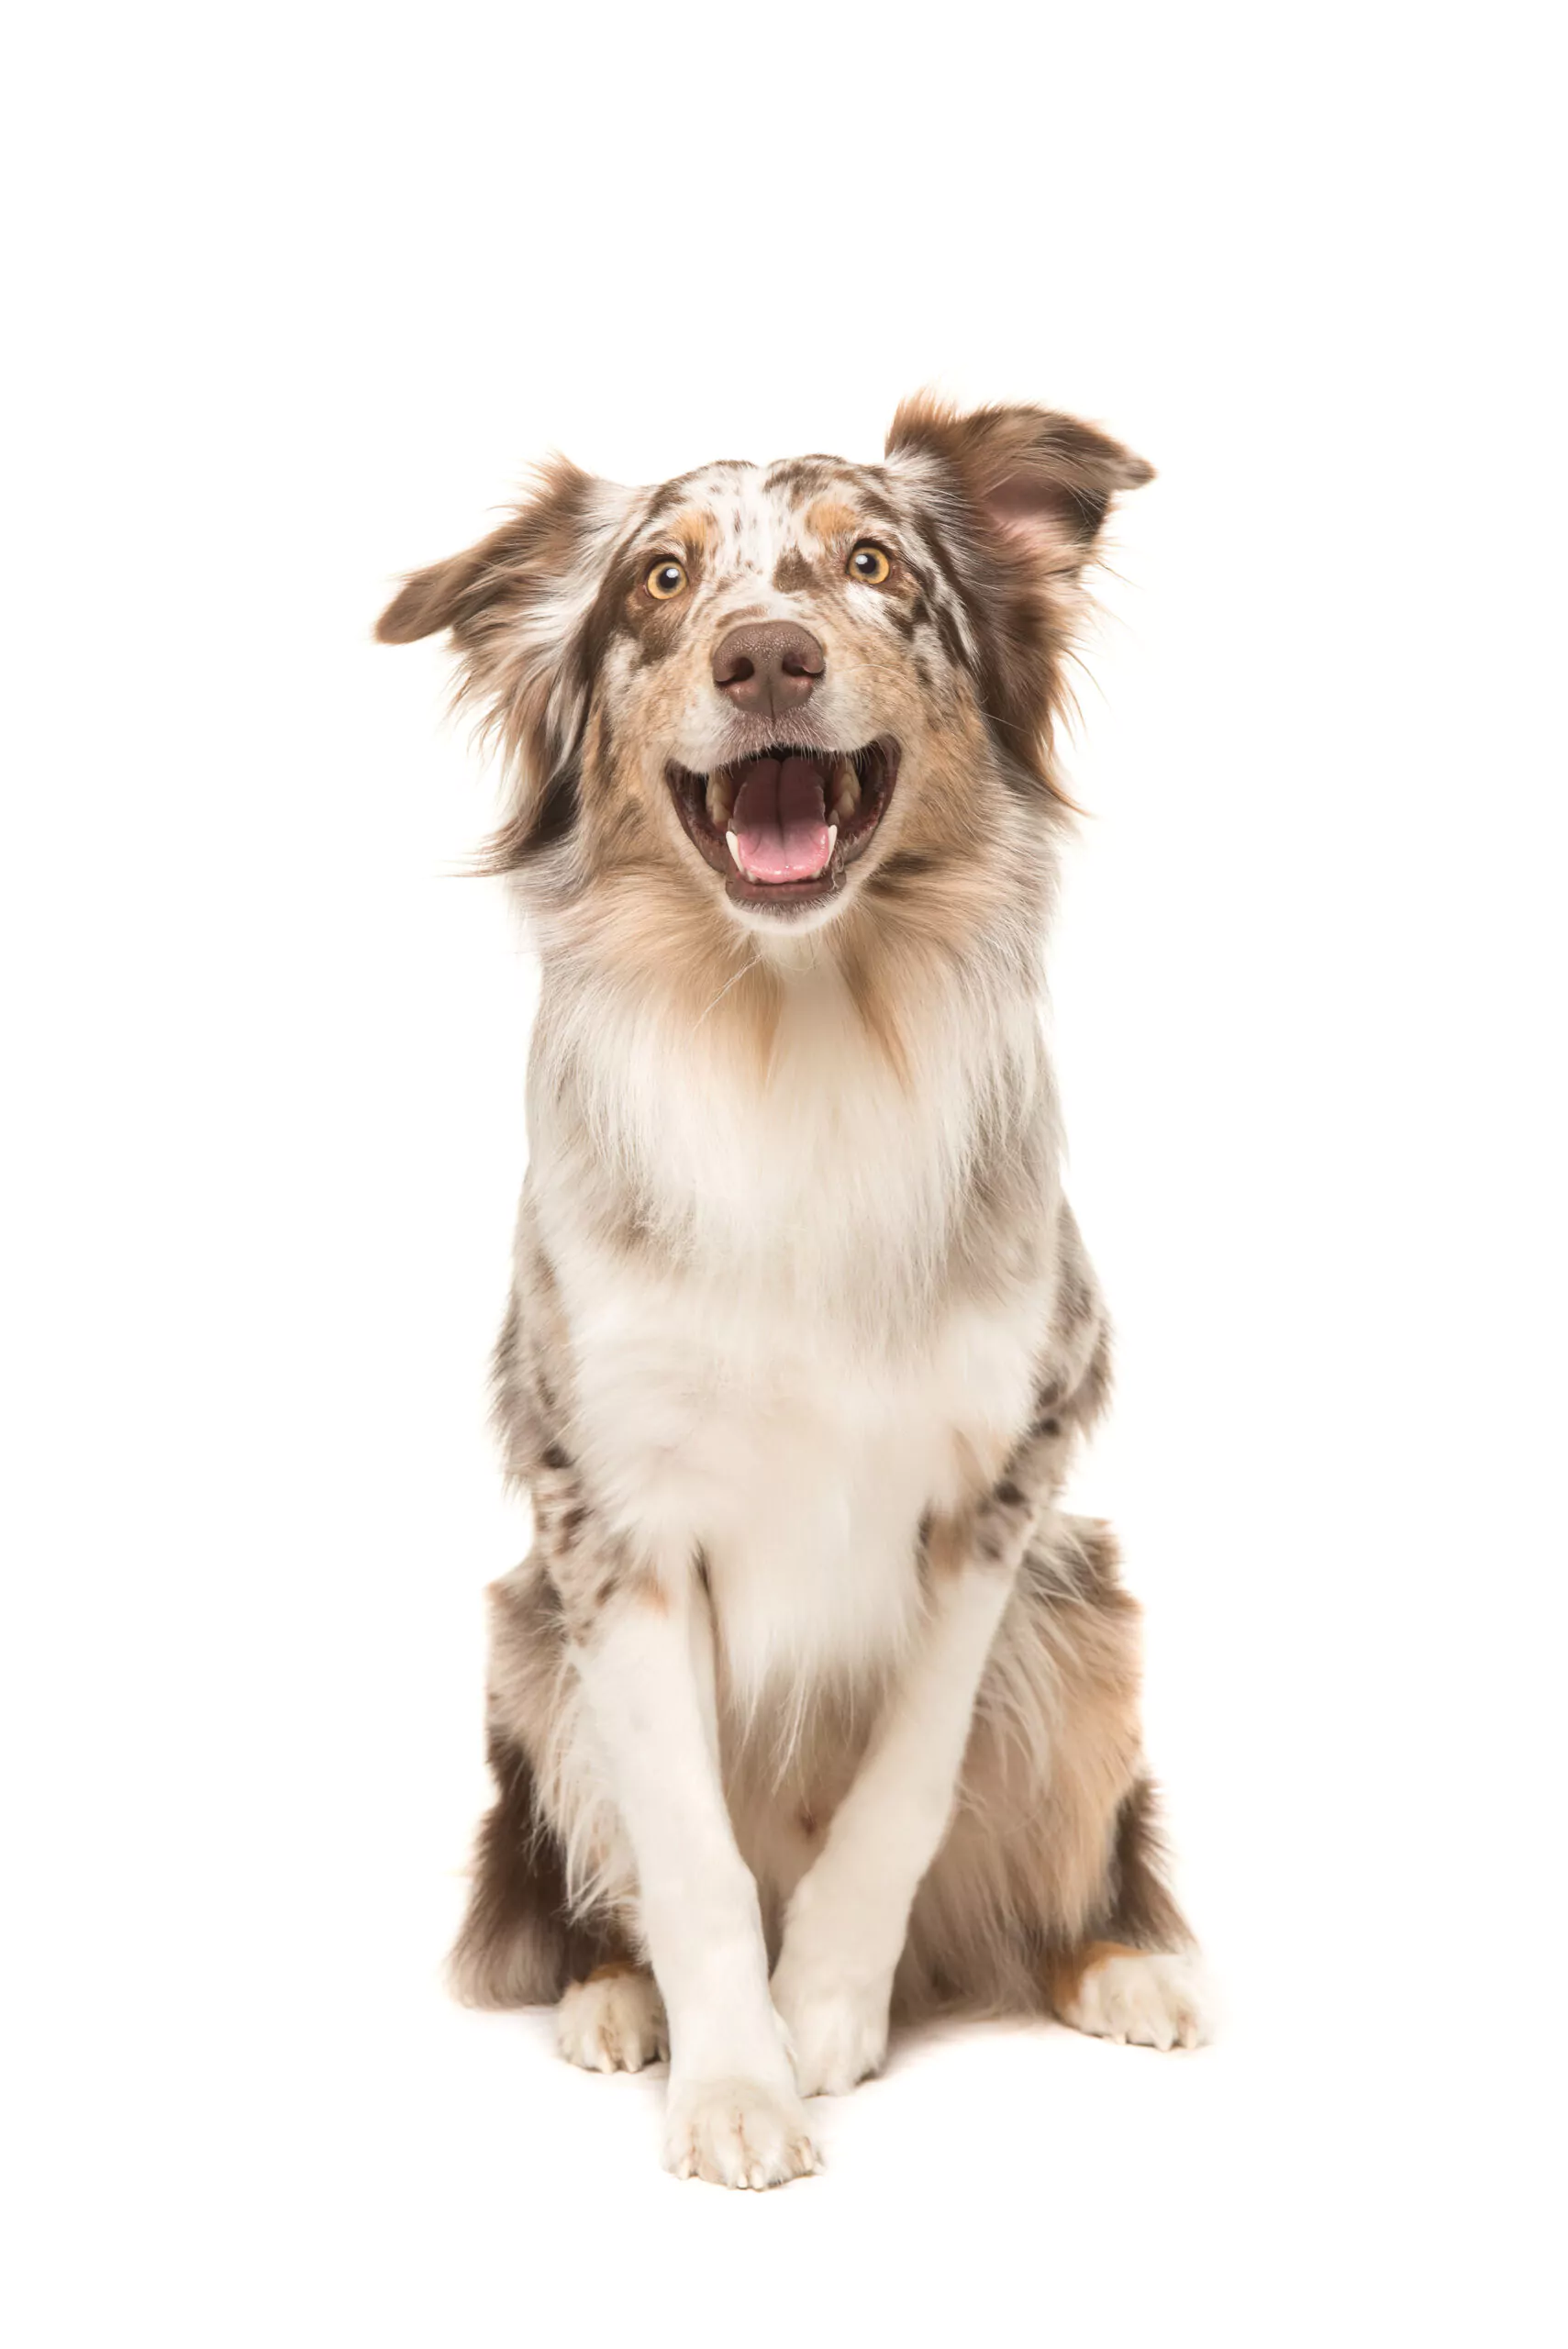 Cute sitting smiling australian shepherd facing the camera with its mouth open seen from the front on a white background